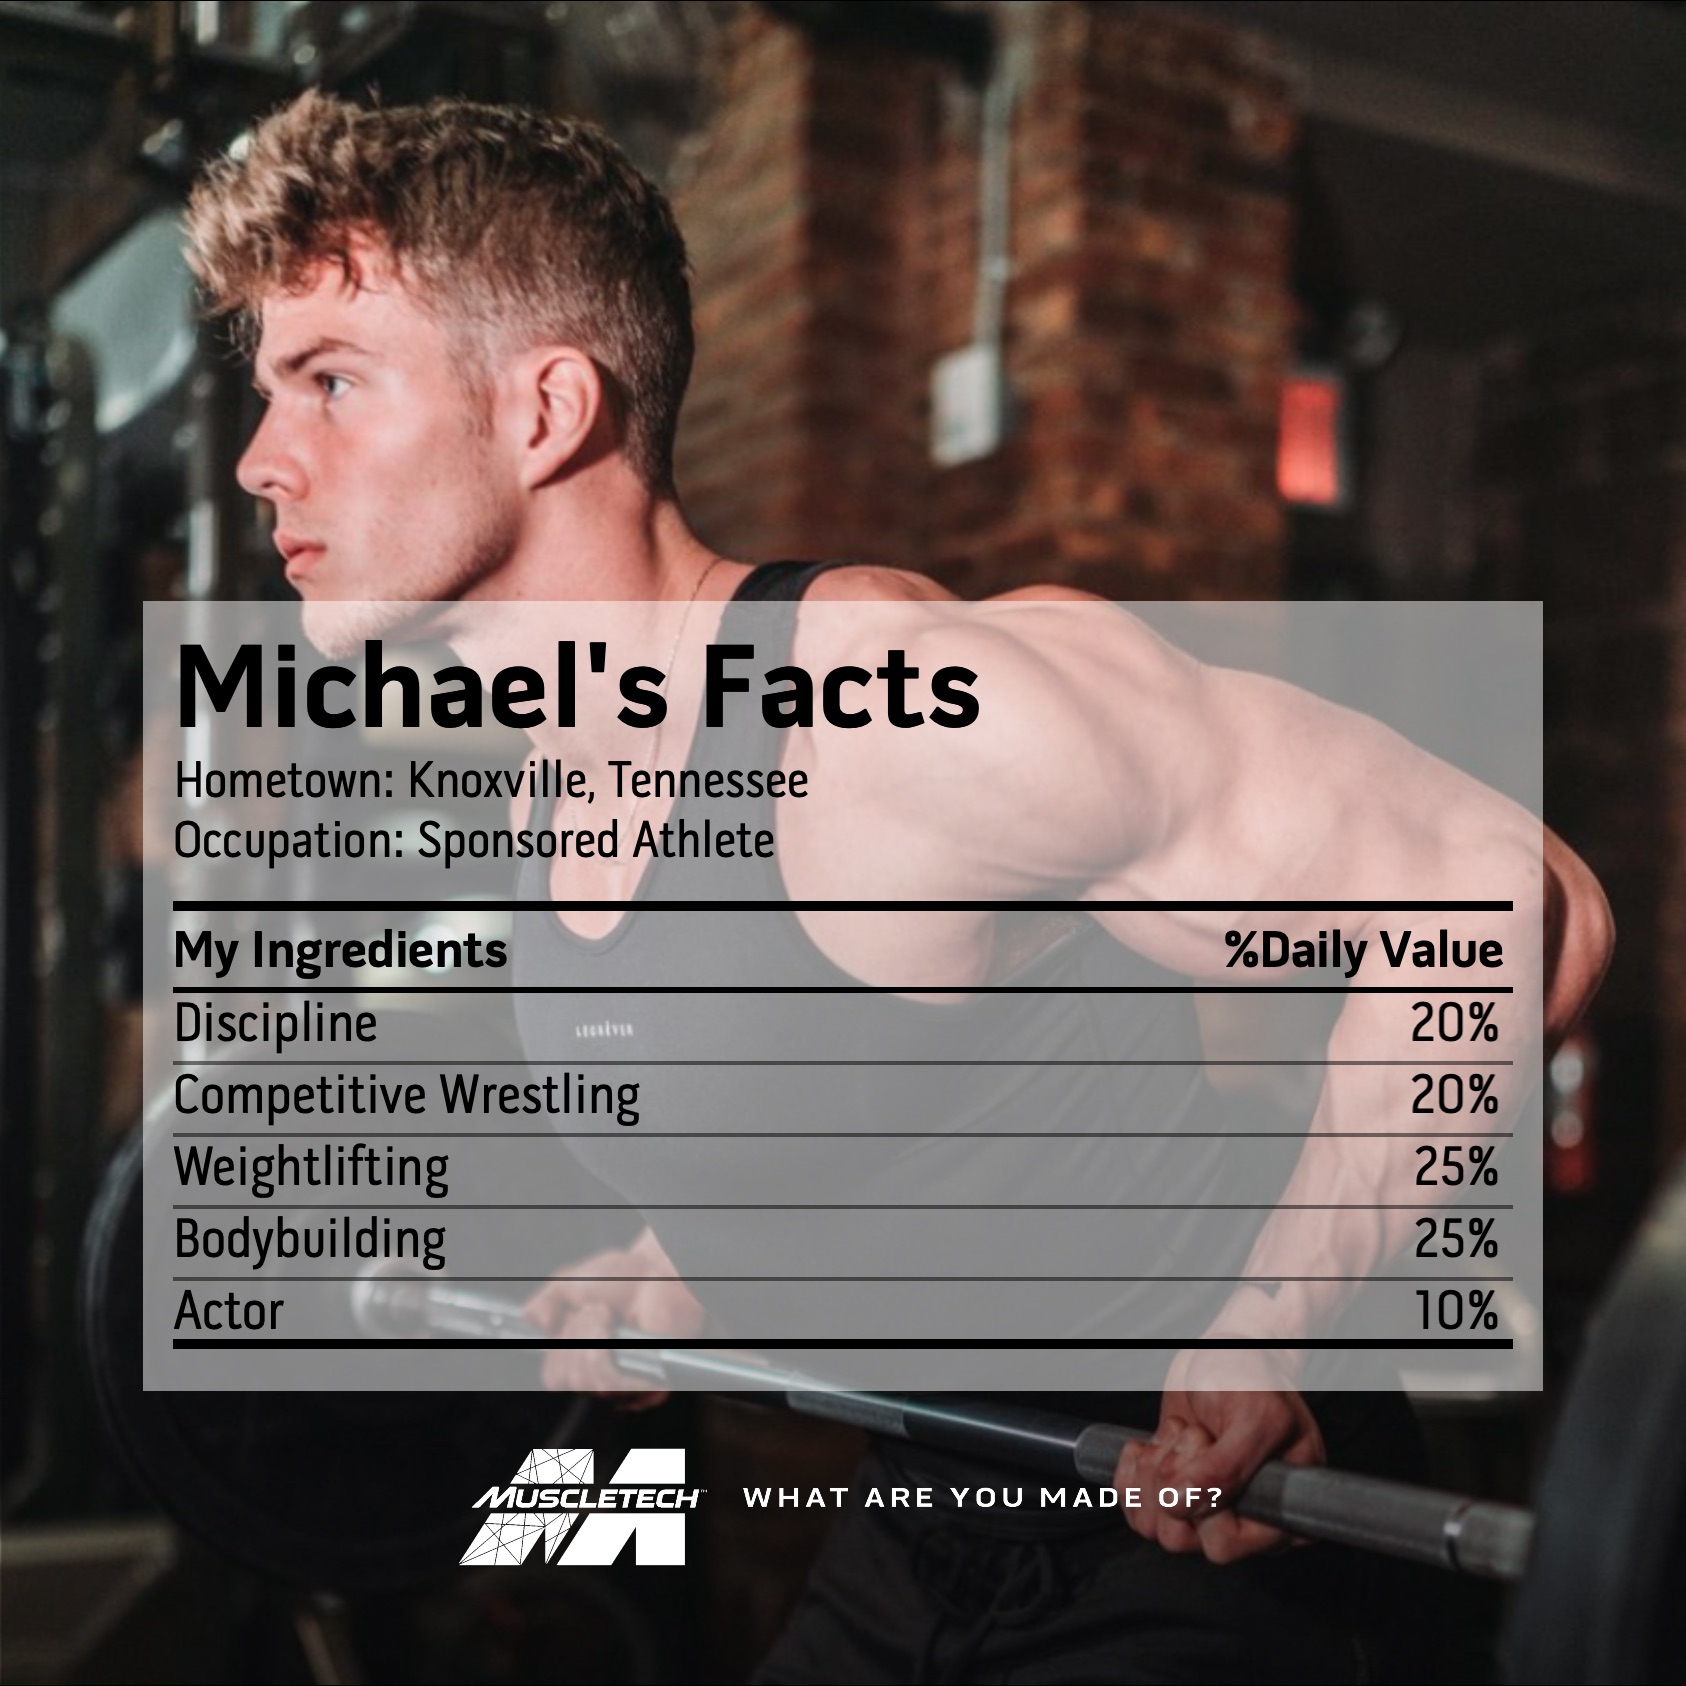 Michael's Facts